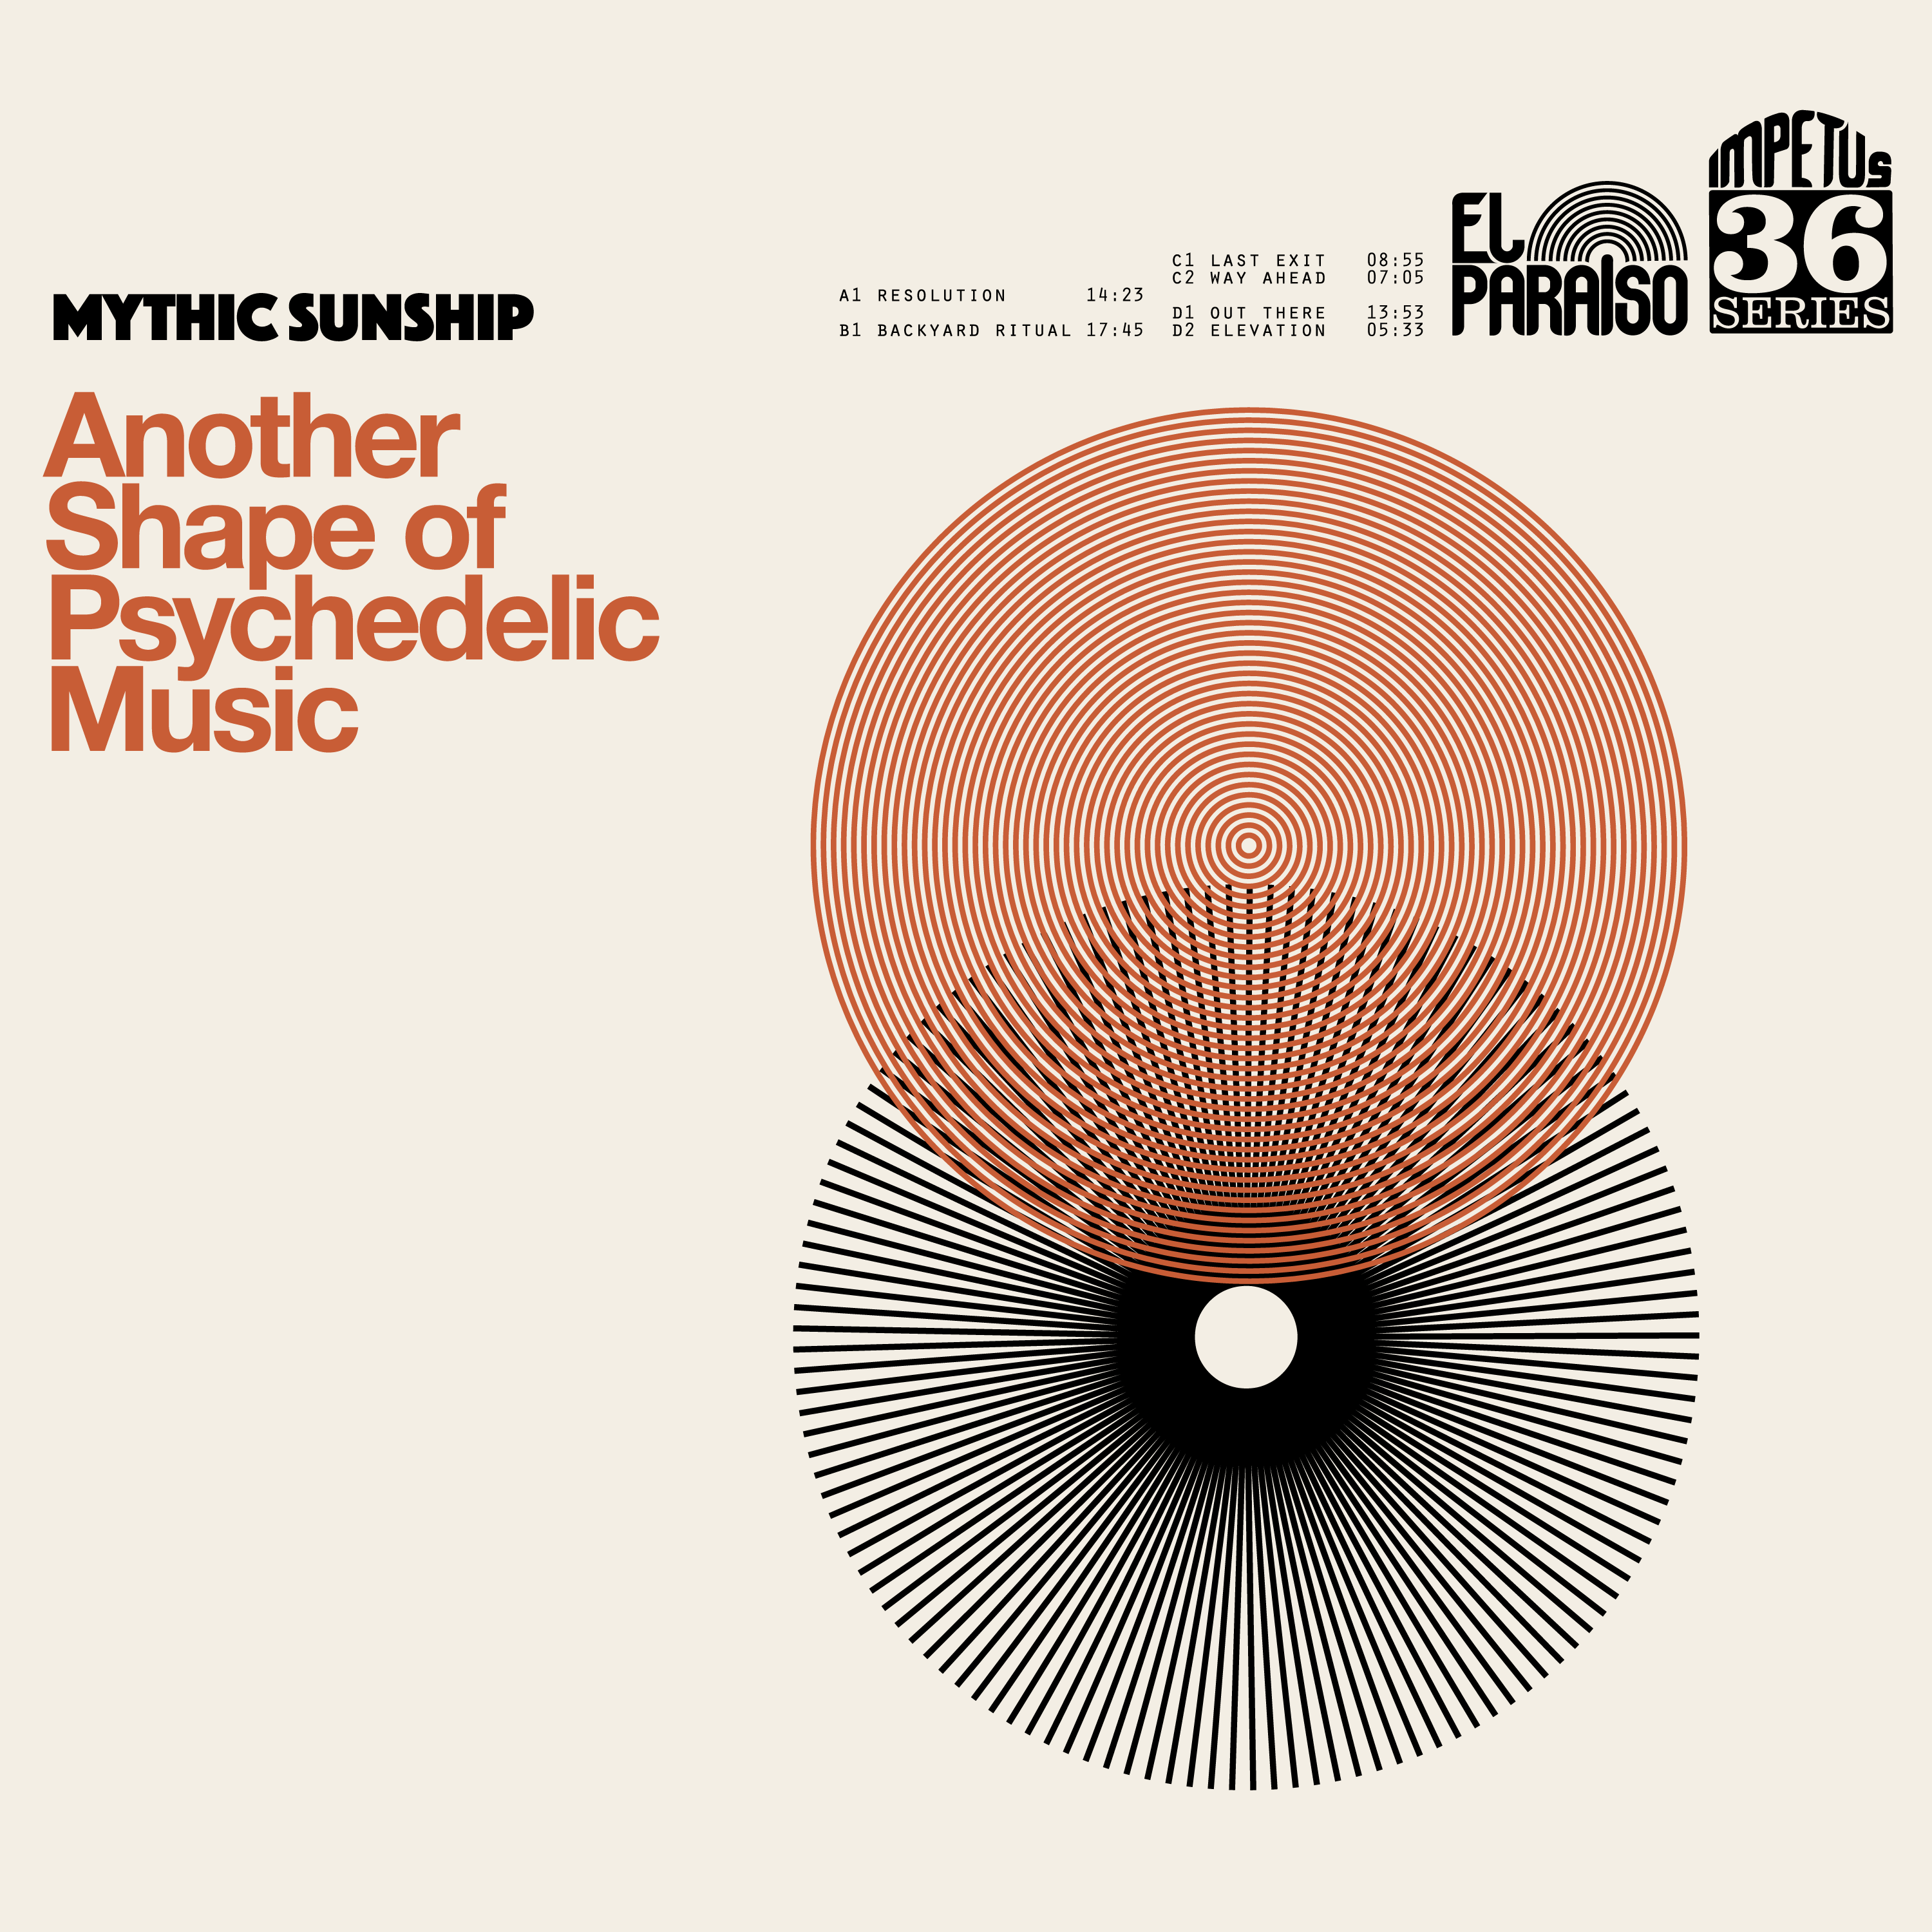 Mythic Sunship - Another Shape of Psychedelic Music